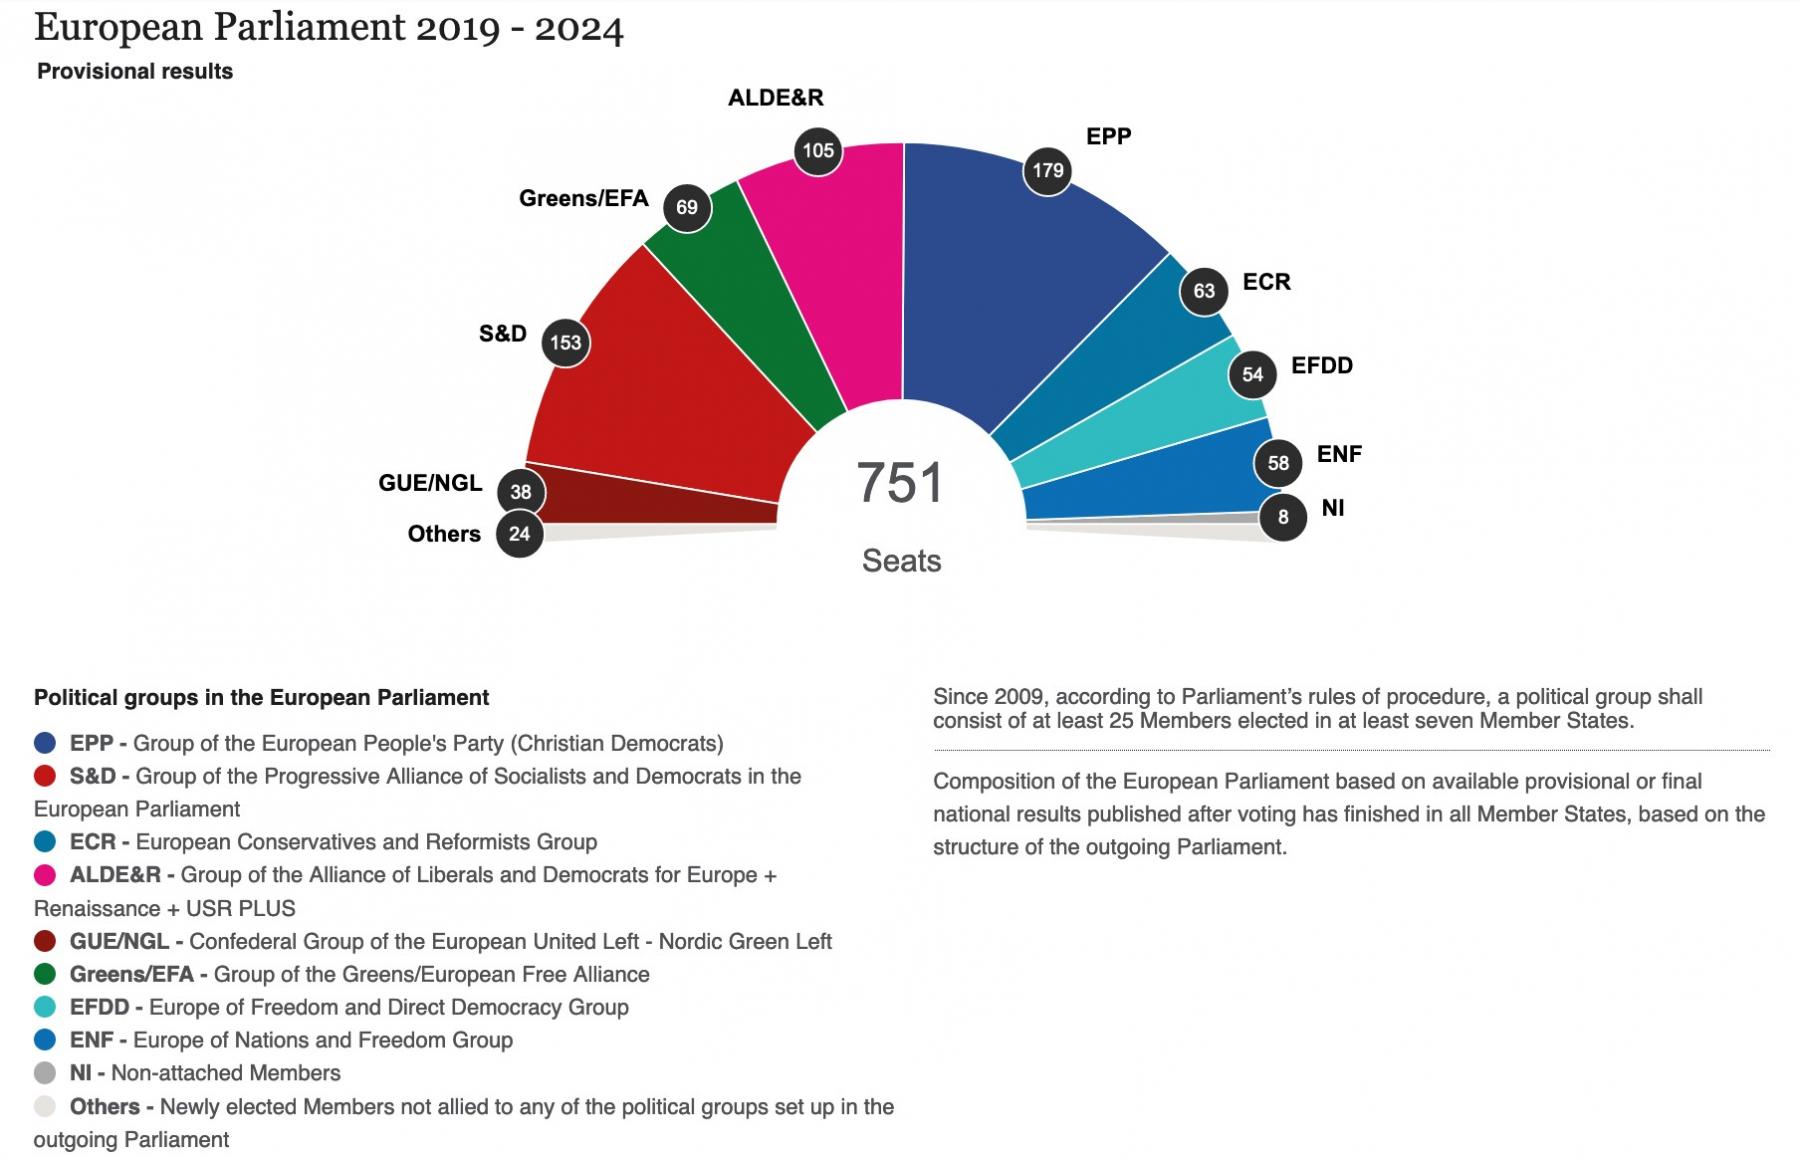 The provision election results for the European Parliament in 2019 to 2024